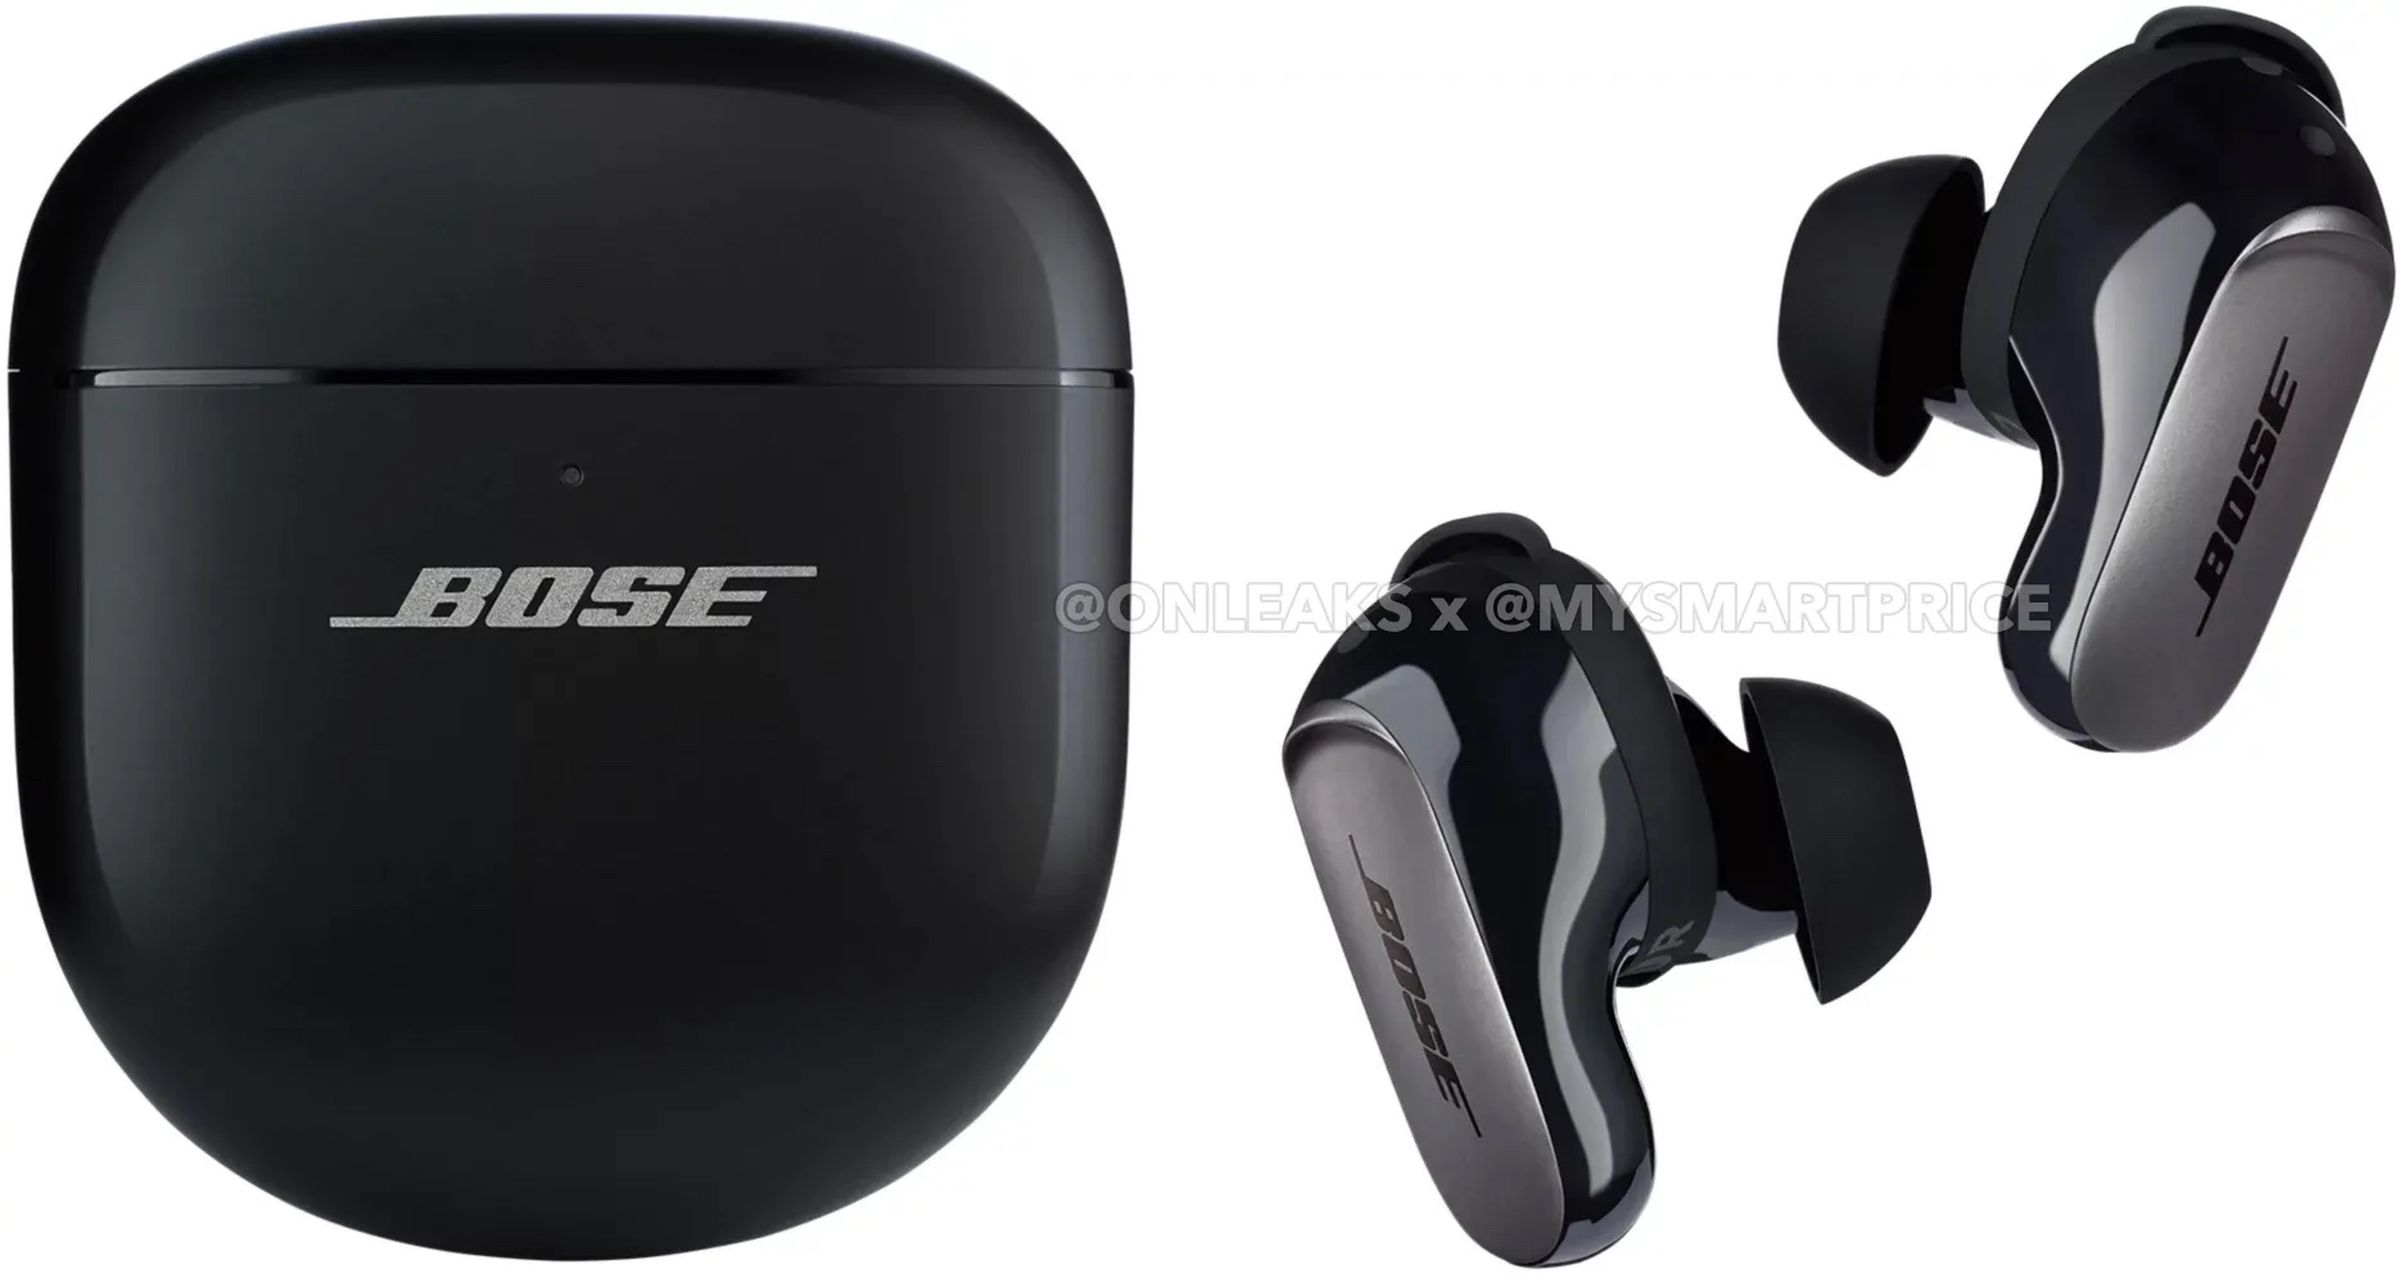 A leaked image of Bose’s QuietComfort Earbuds Ultra.